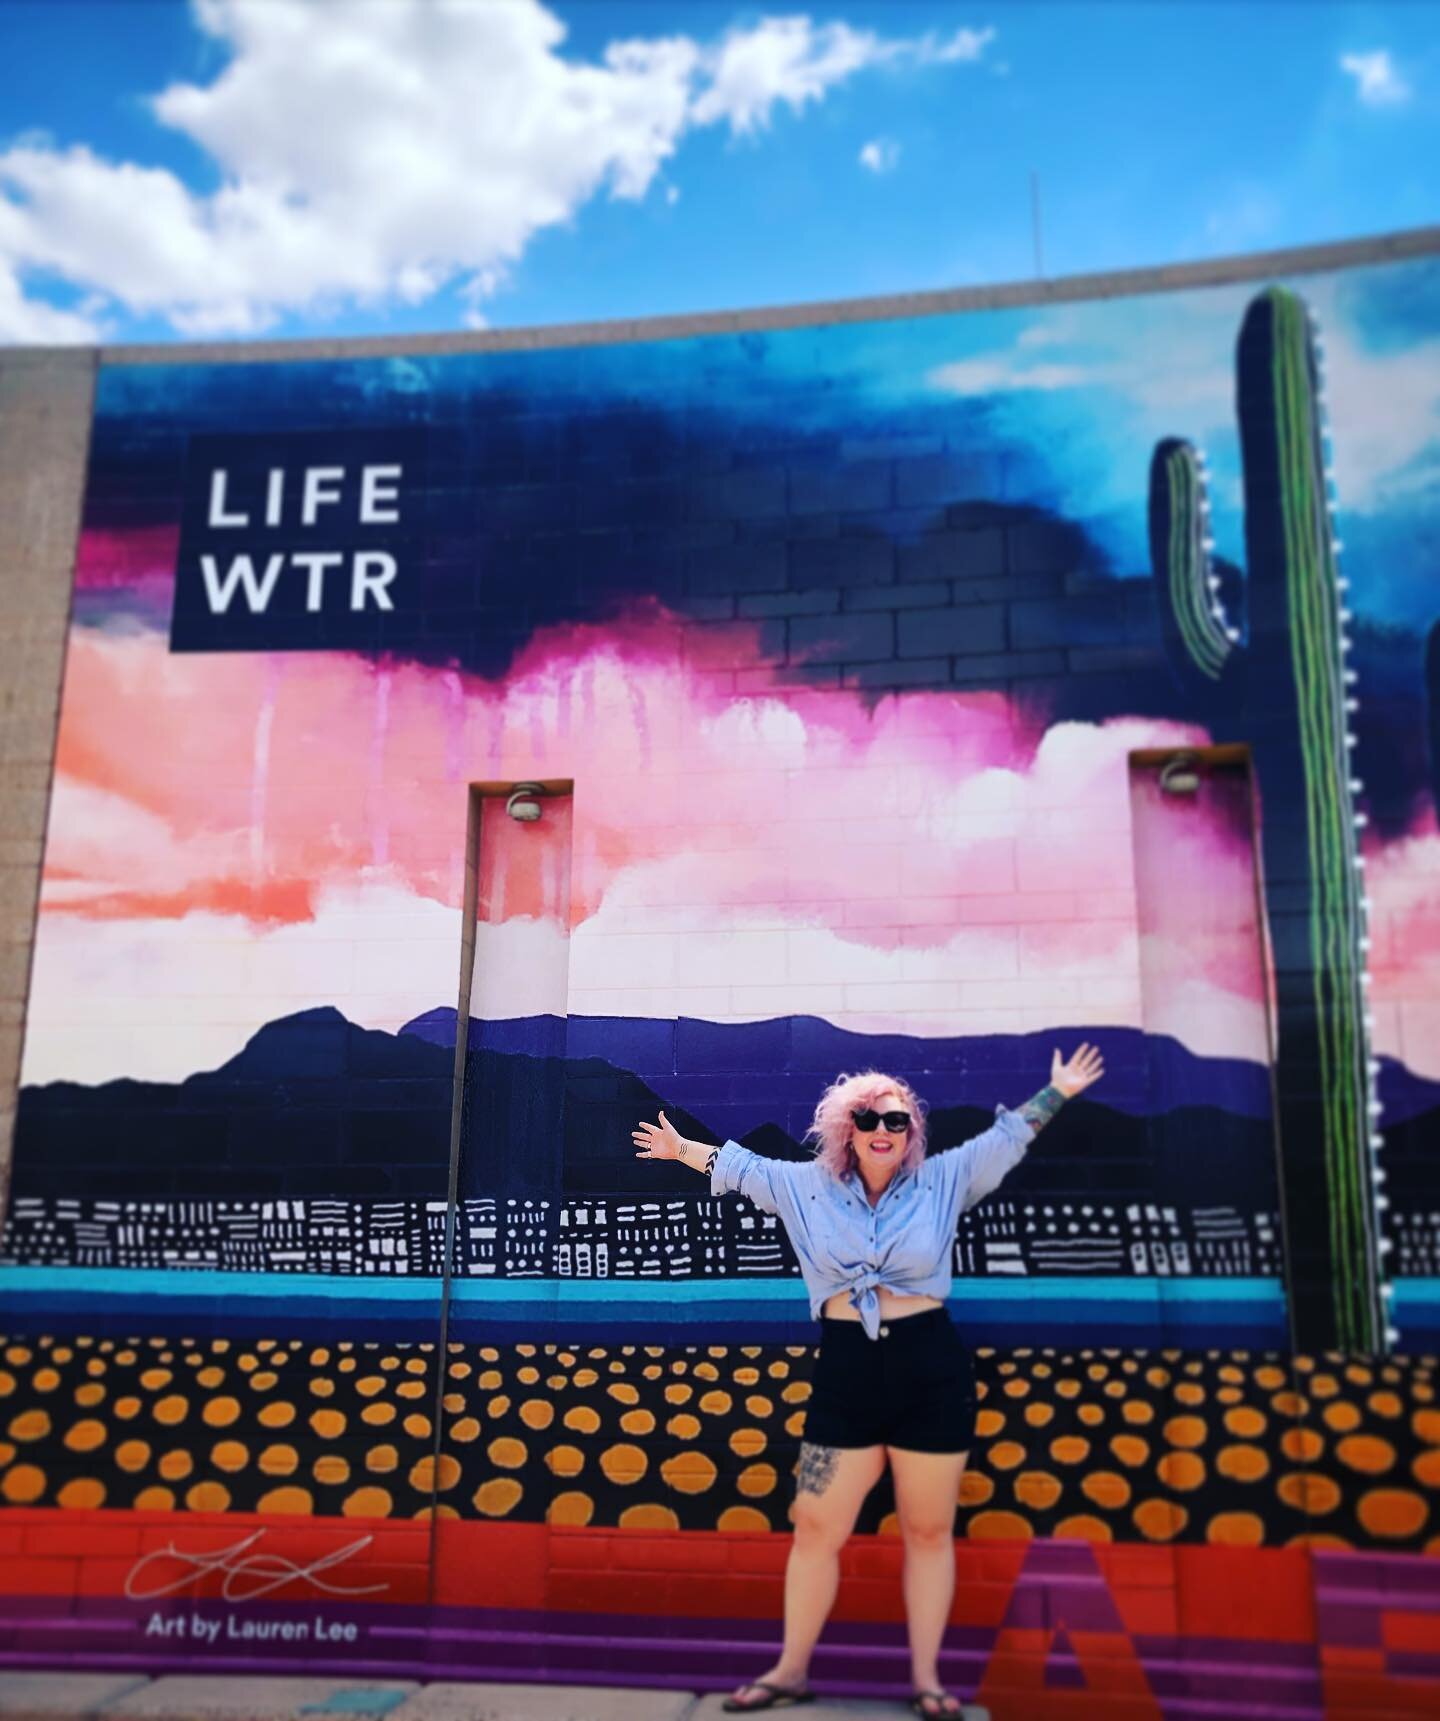 TODAY IS THE DAY! New mural being installed for @LIFEWTR in downtown Phoenix with collaboration of @valleymetro 🚊🚊🚊 to increase the visibility of this mural! I am so happy that I was chosen to represent Arizona and the elements that make this home